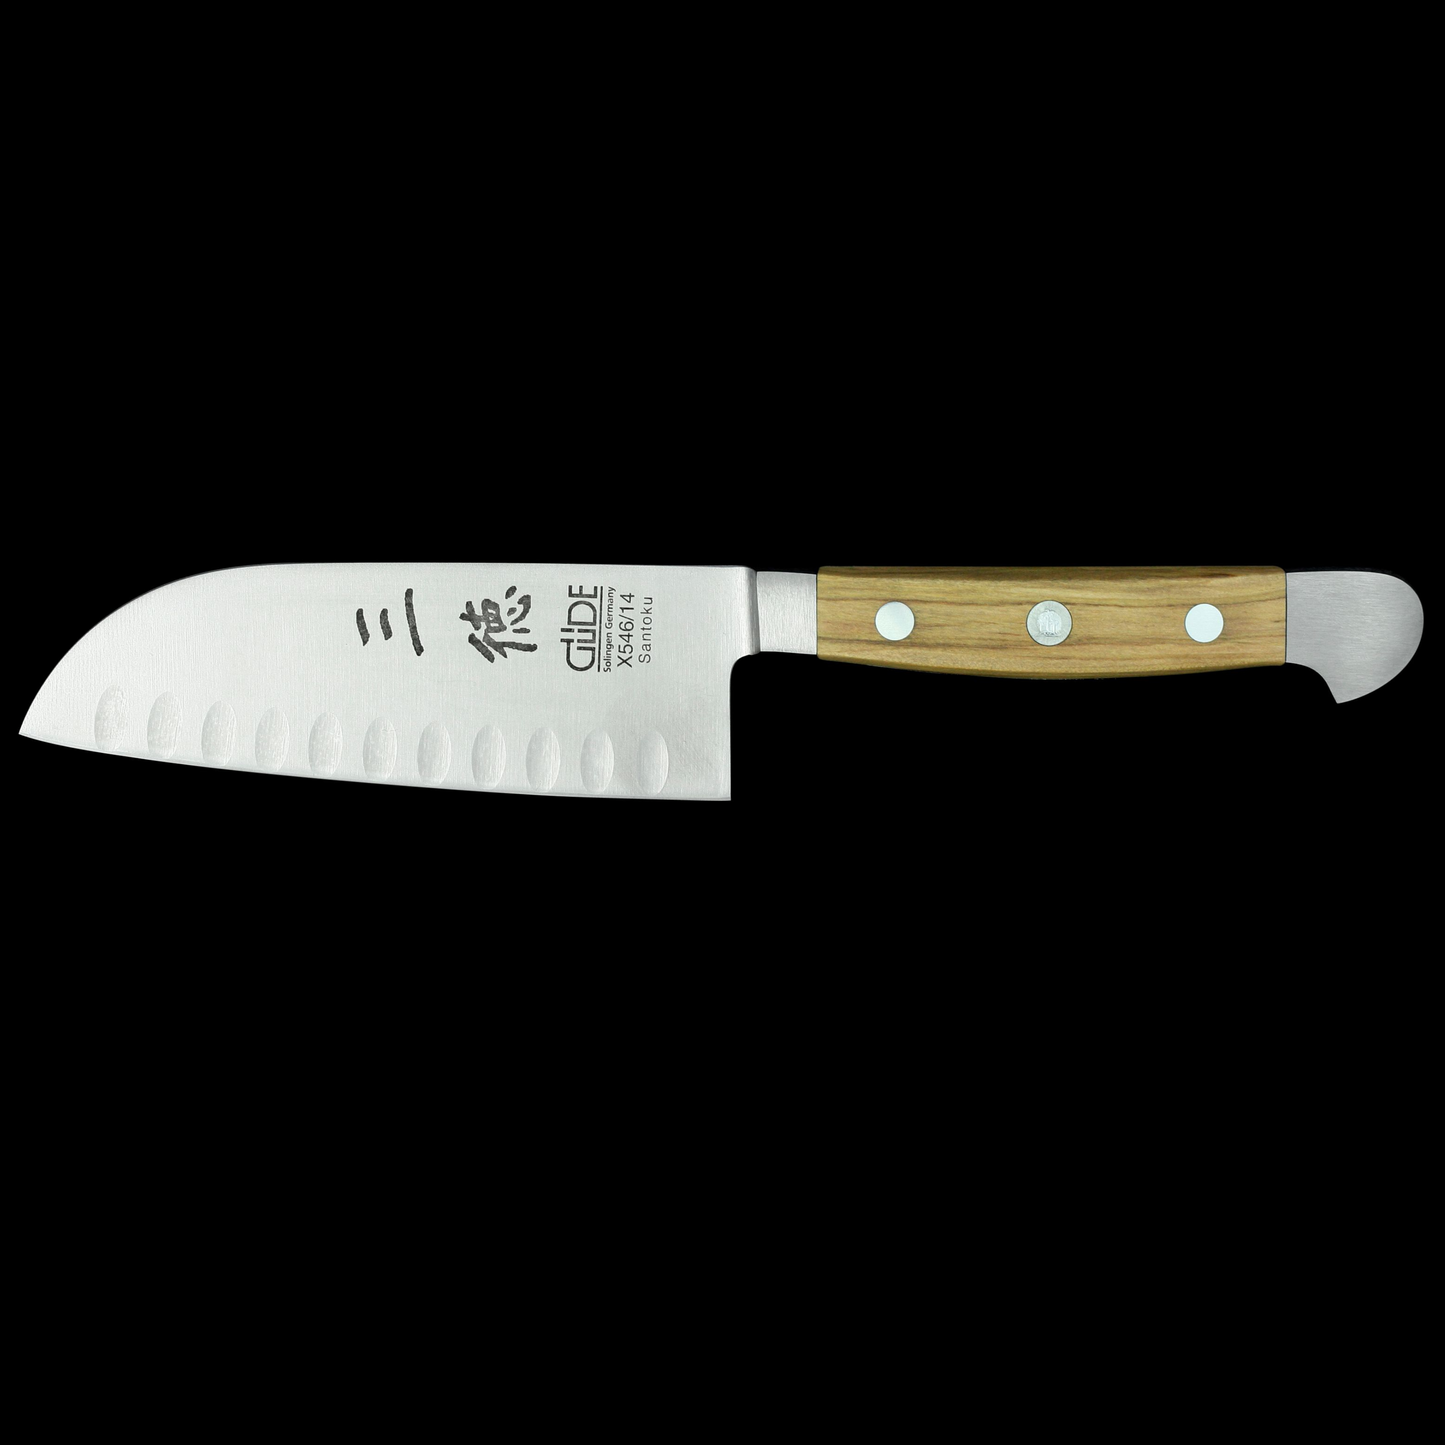 Gude Alpha Olive Series Forged Double Bolster Santoku Knife 5", Olivewood Handle and Granton Edge - GuedeUSA